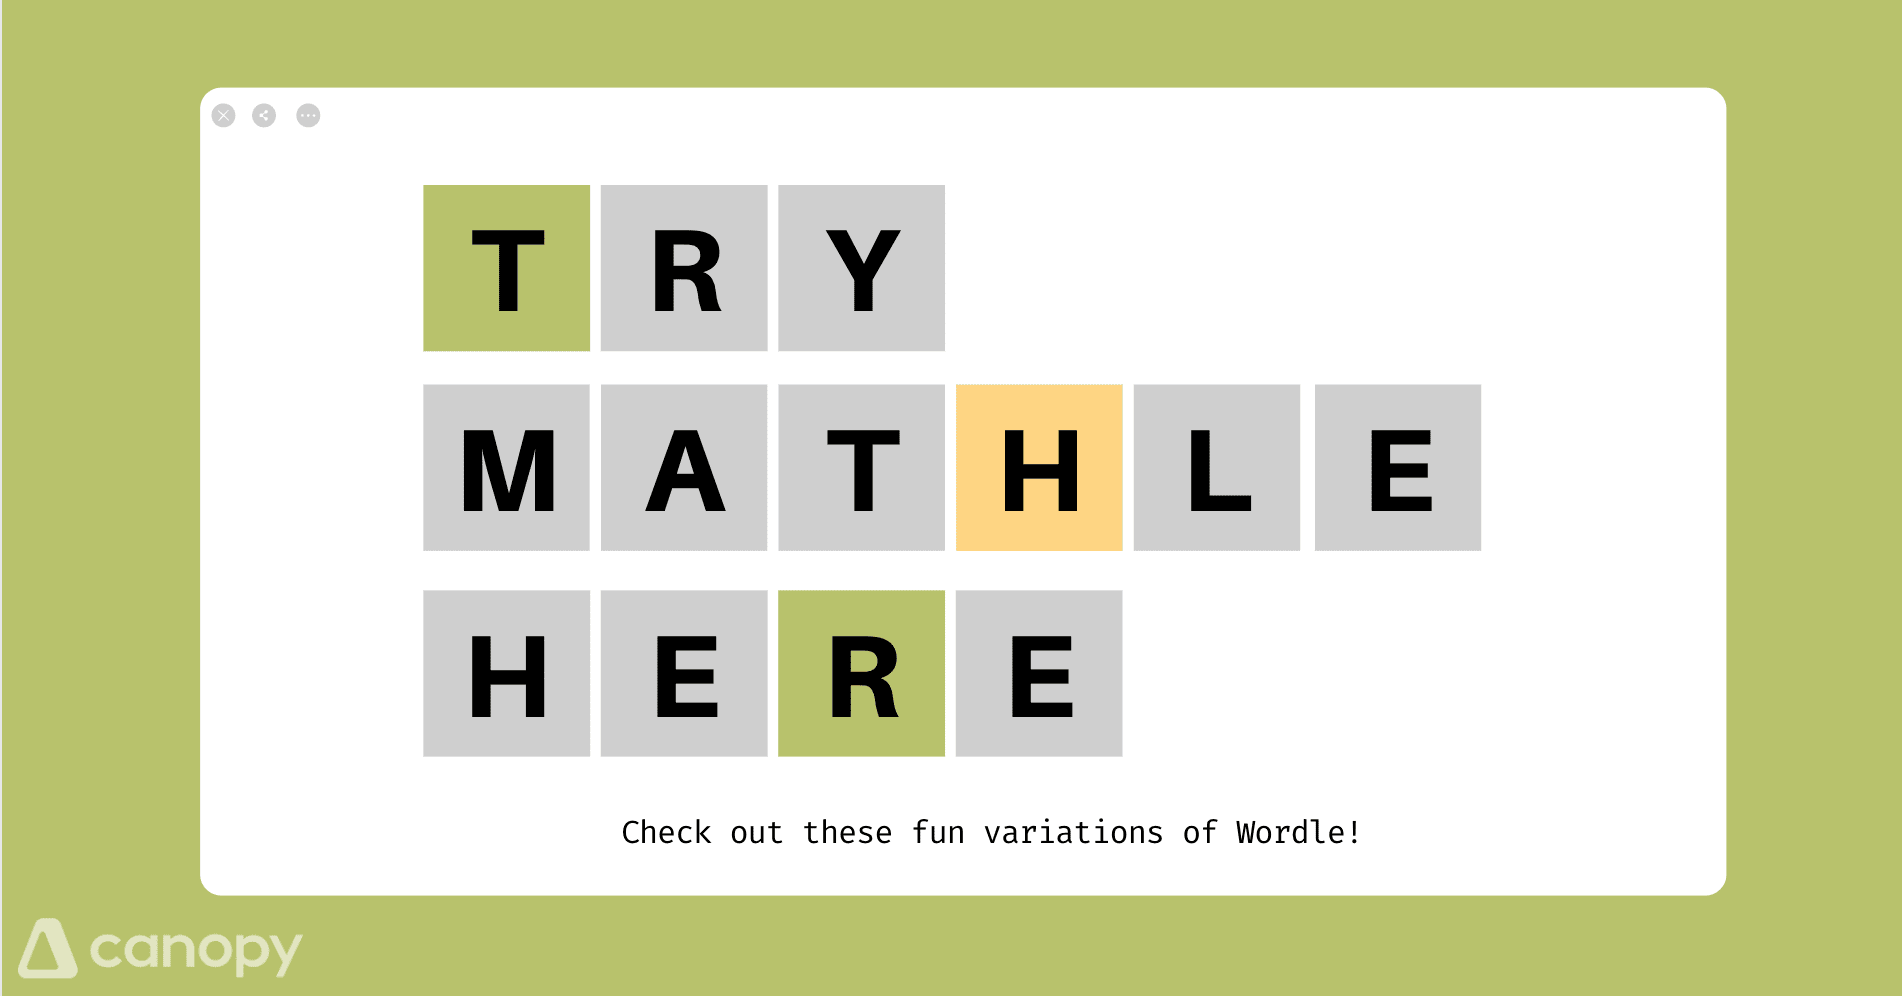 You've Heard About Wordle, But What About Mathle?